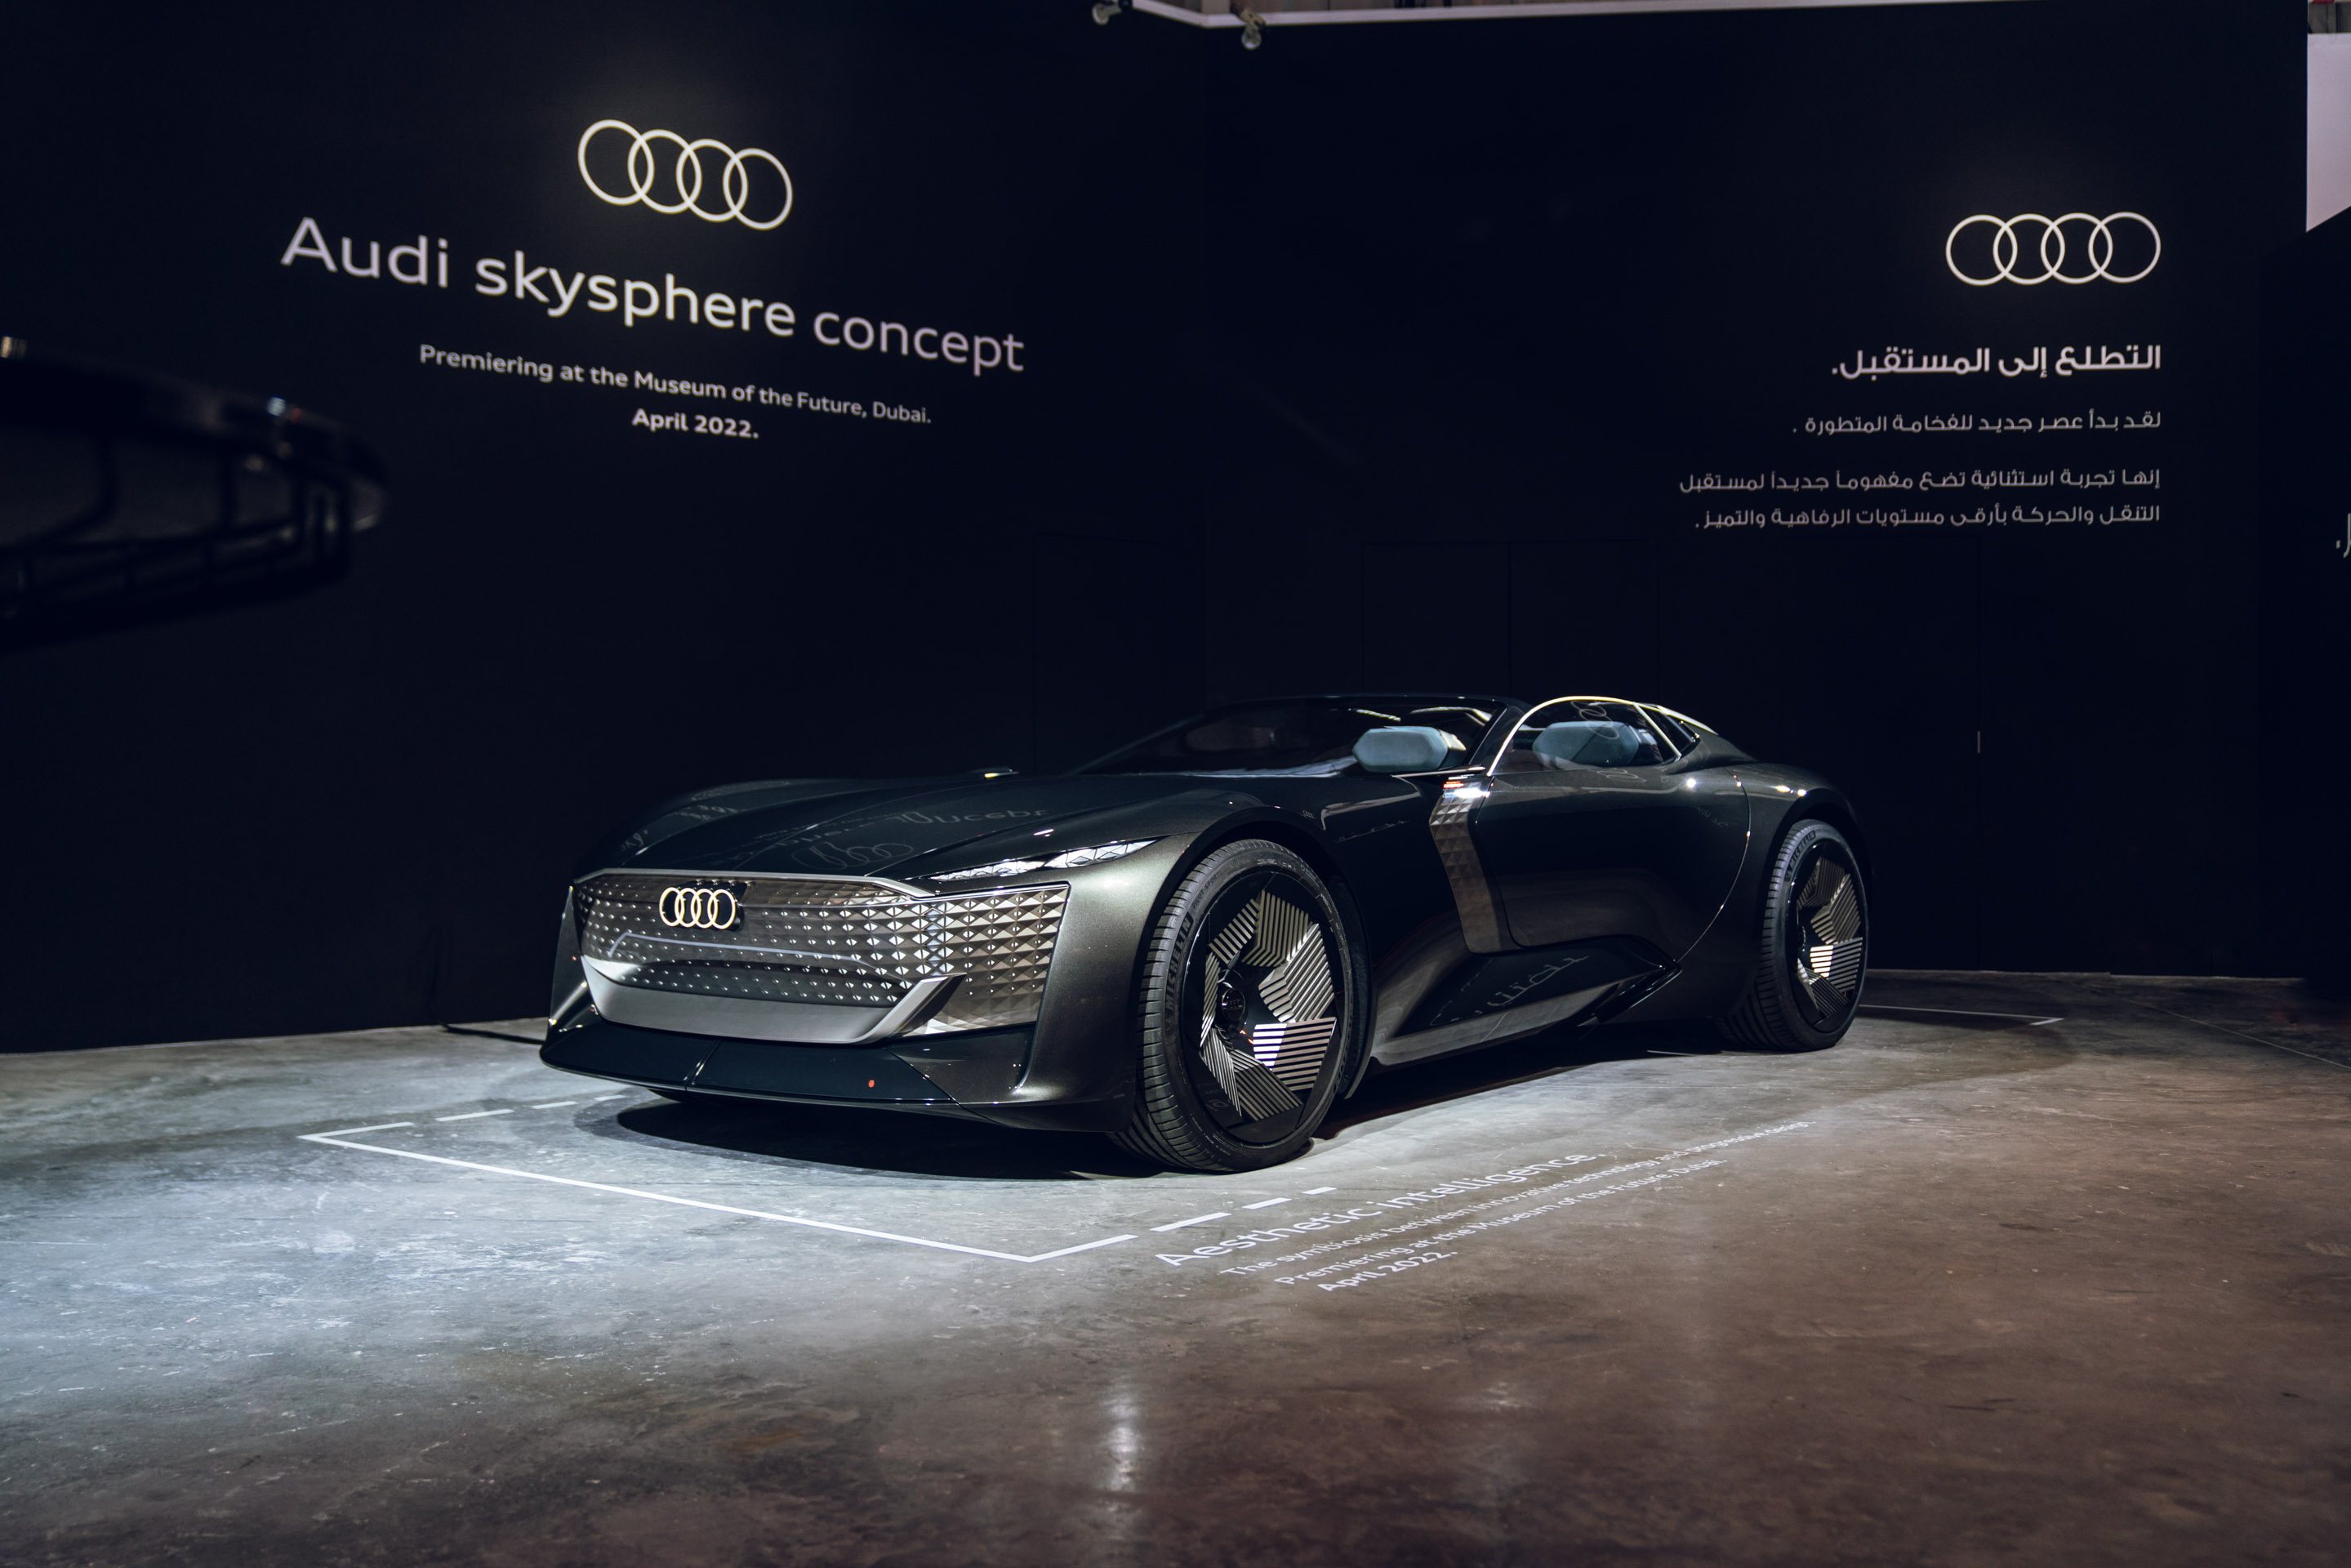 Audi Skysphere concept makes its official Middle East debut in Dubai